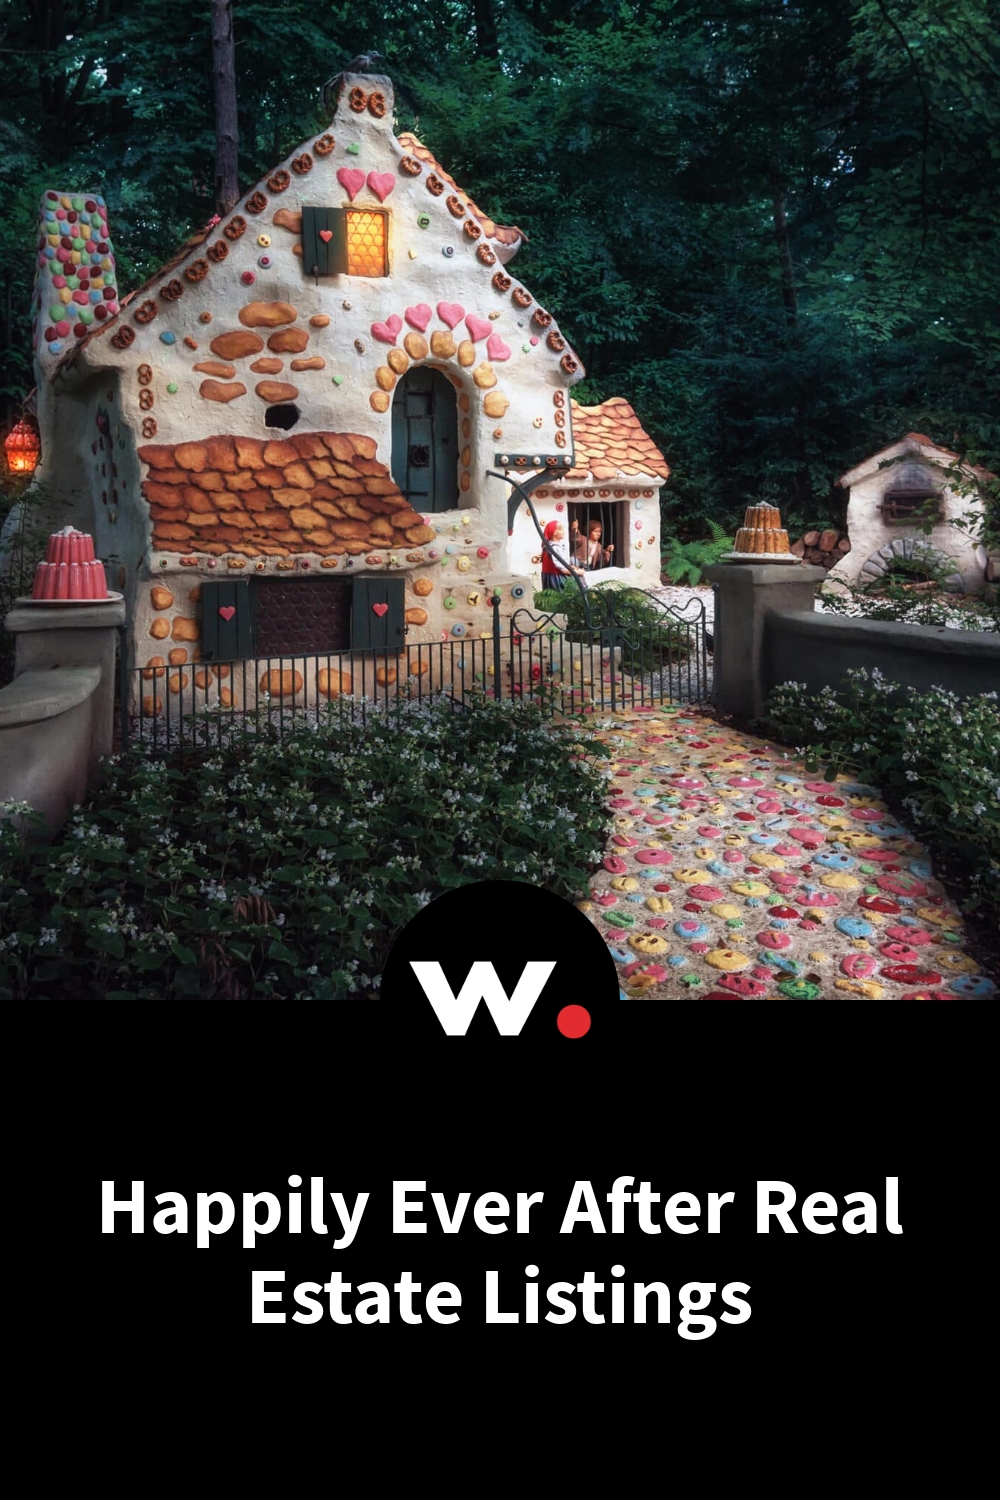 Happily Ever After Real Estate Listings